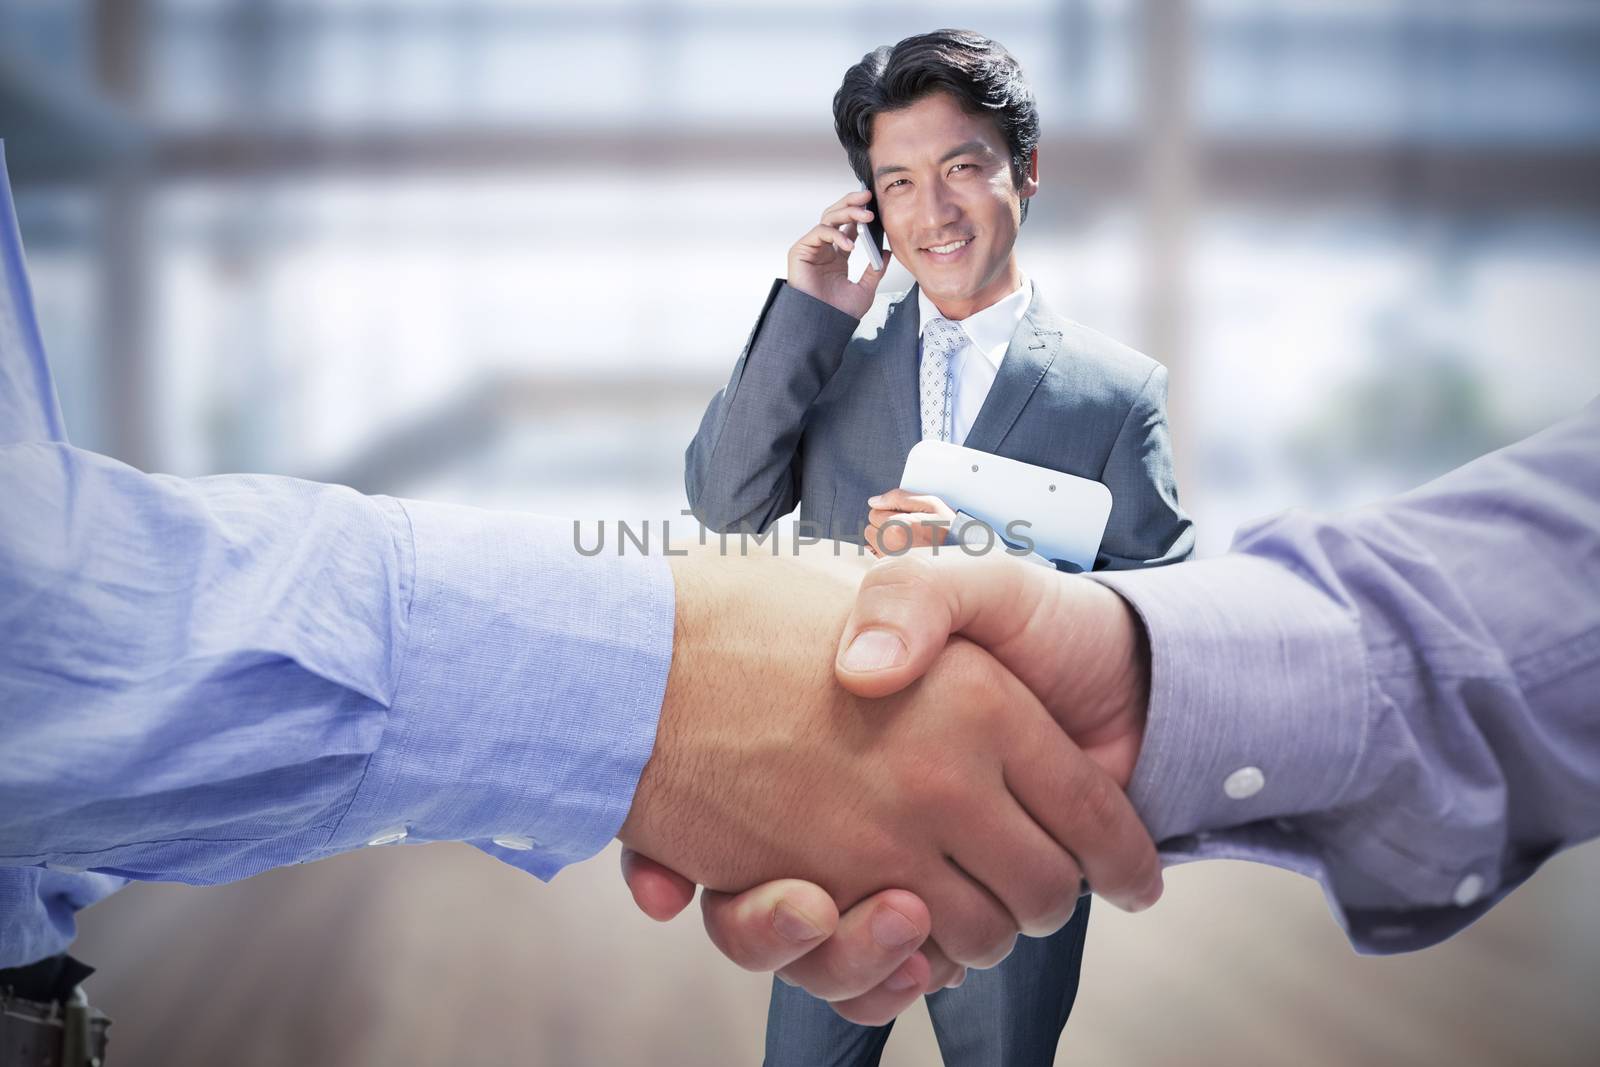 Composite image of two men shaking hands by Wavebreakmedia